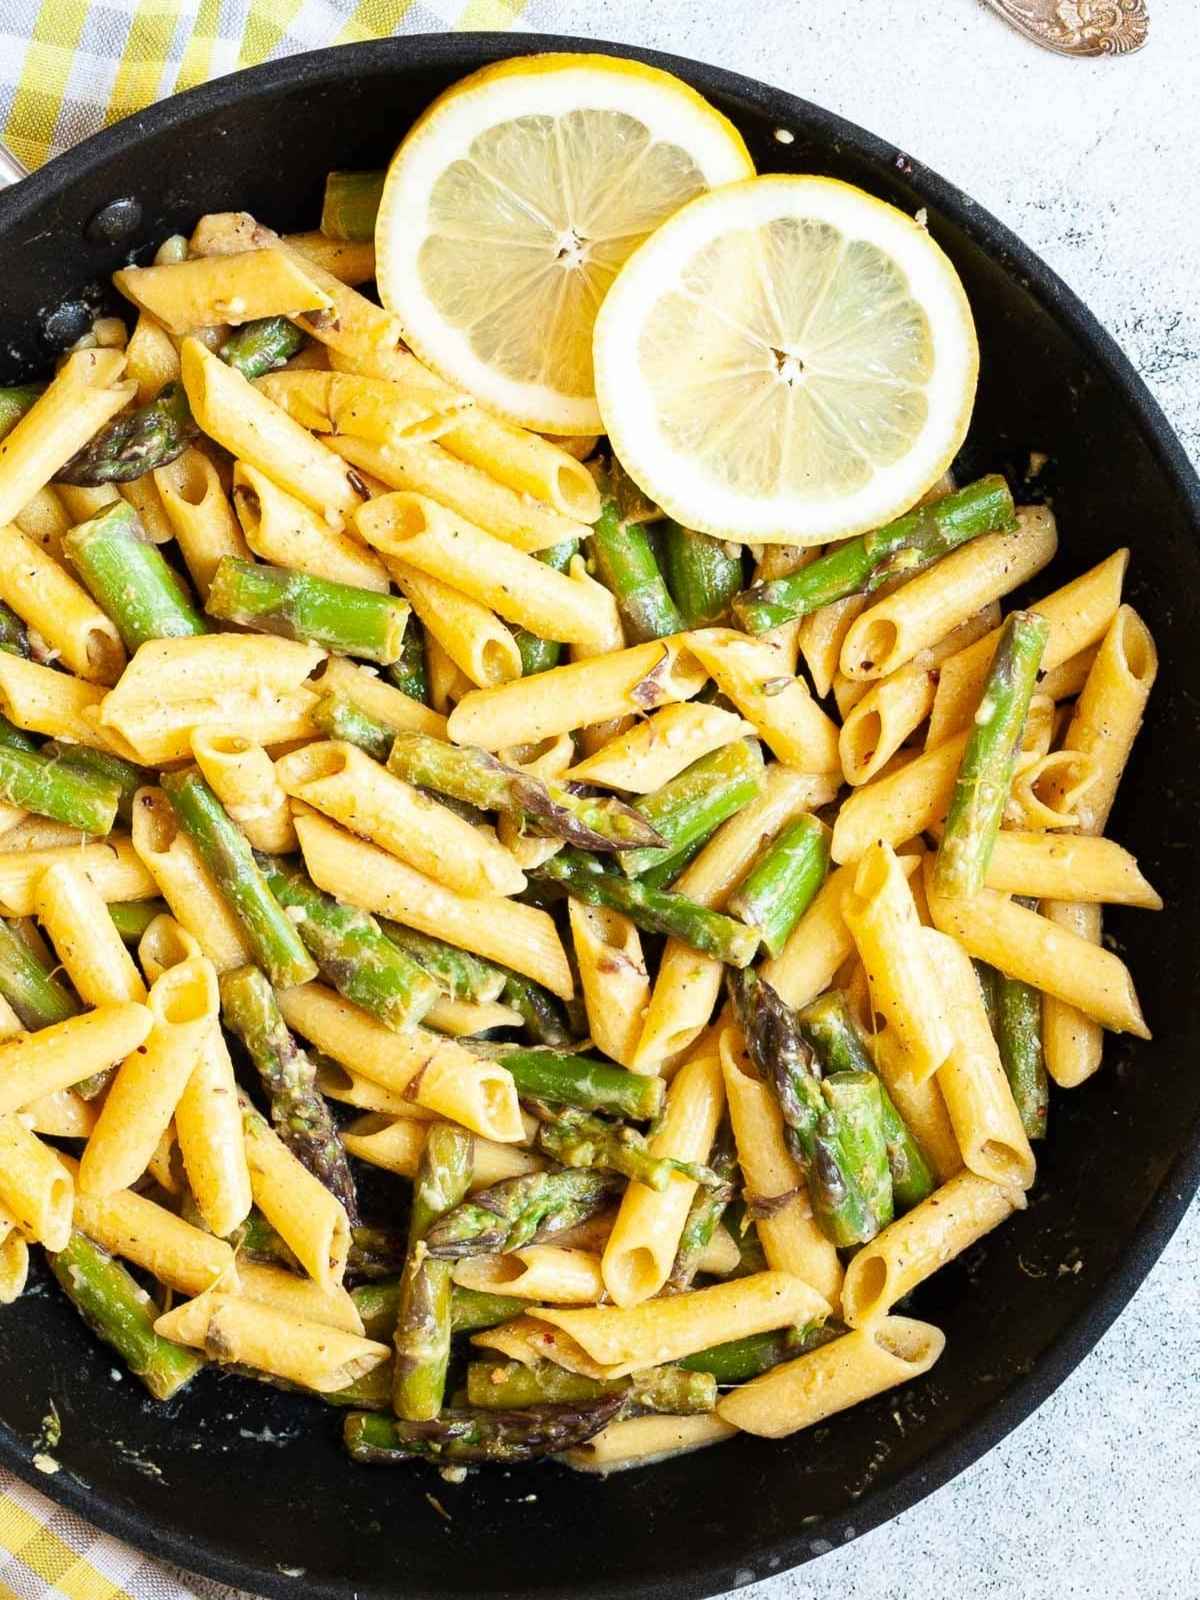 Pasta and asparagus cooked in a wok.